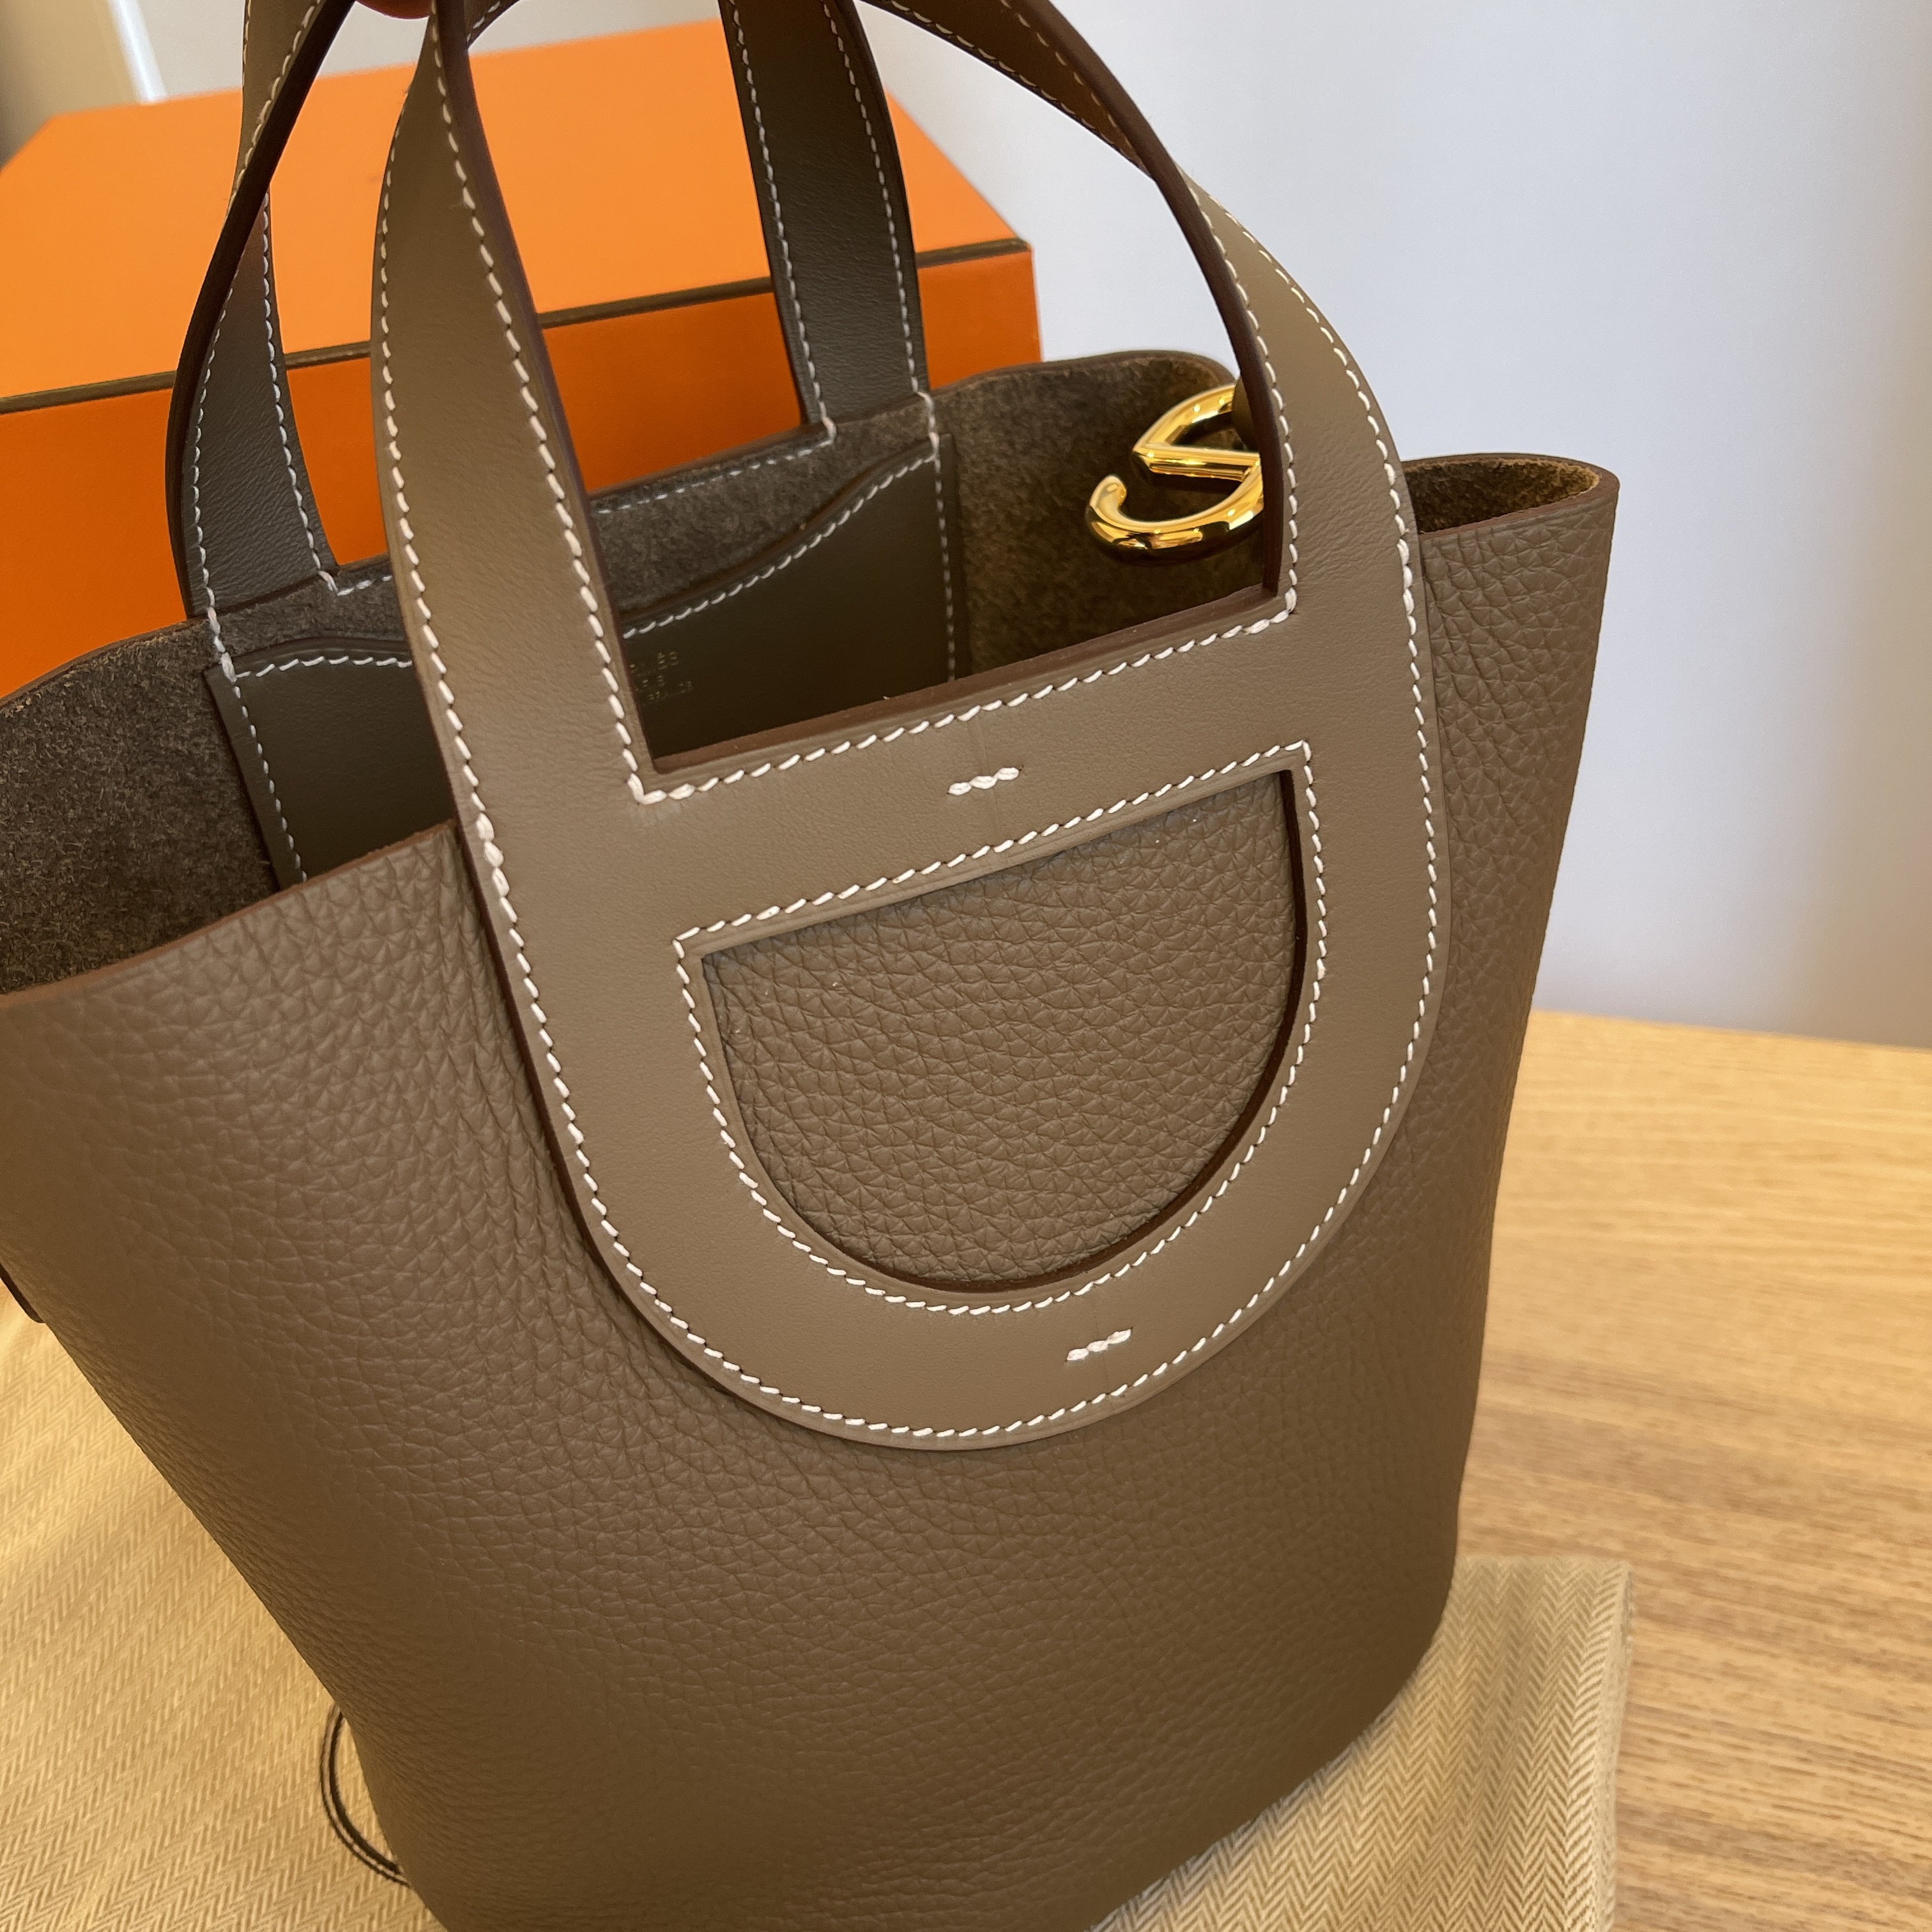 HERMES in-the-loop Tote Bag Size 18 Taurillon Clemence/Swift Leather Chai